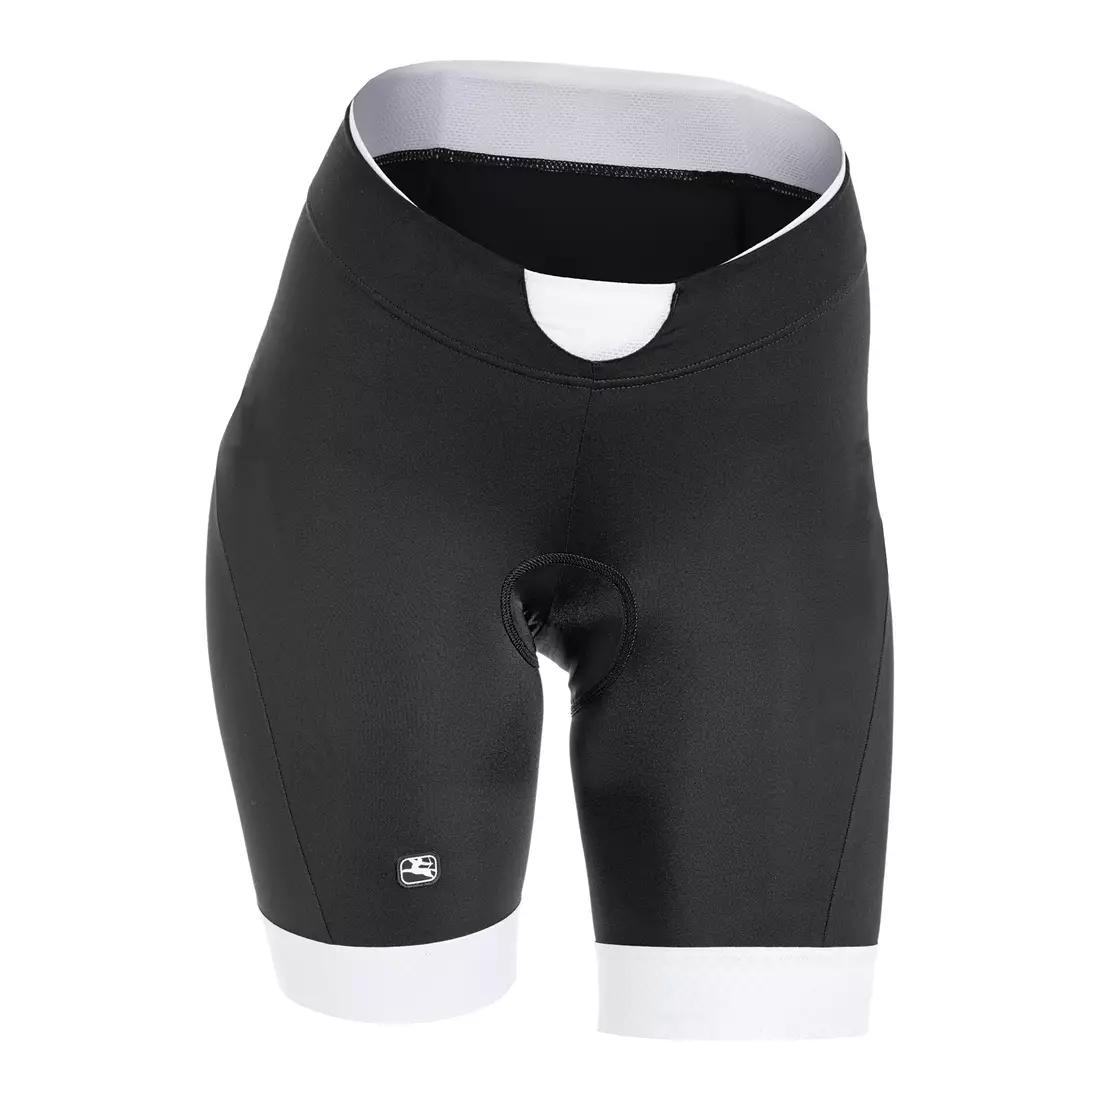 GIORDANA SILVERLINE women's cycling shorts, black and white